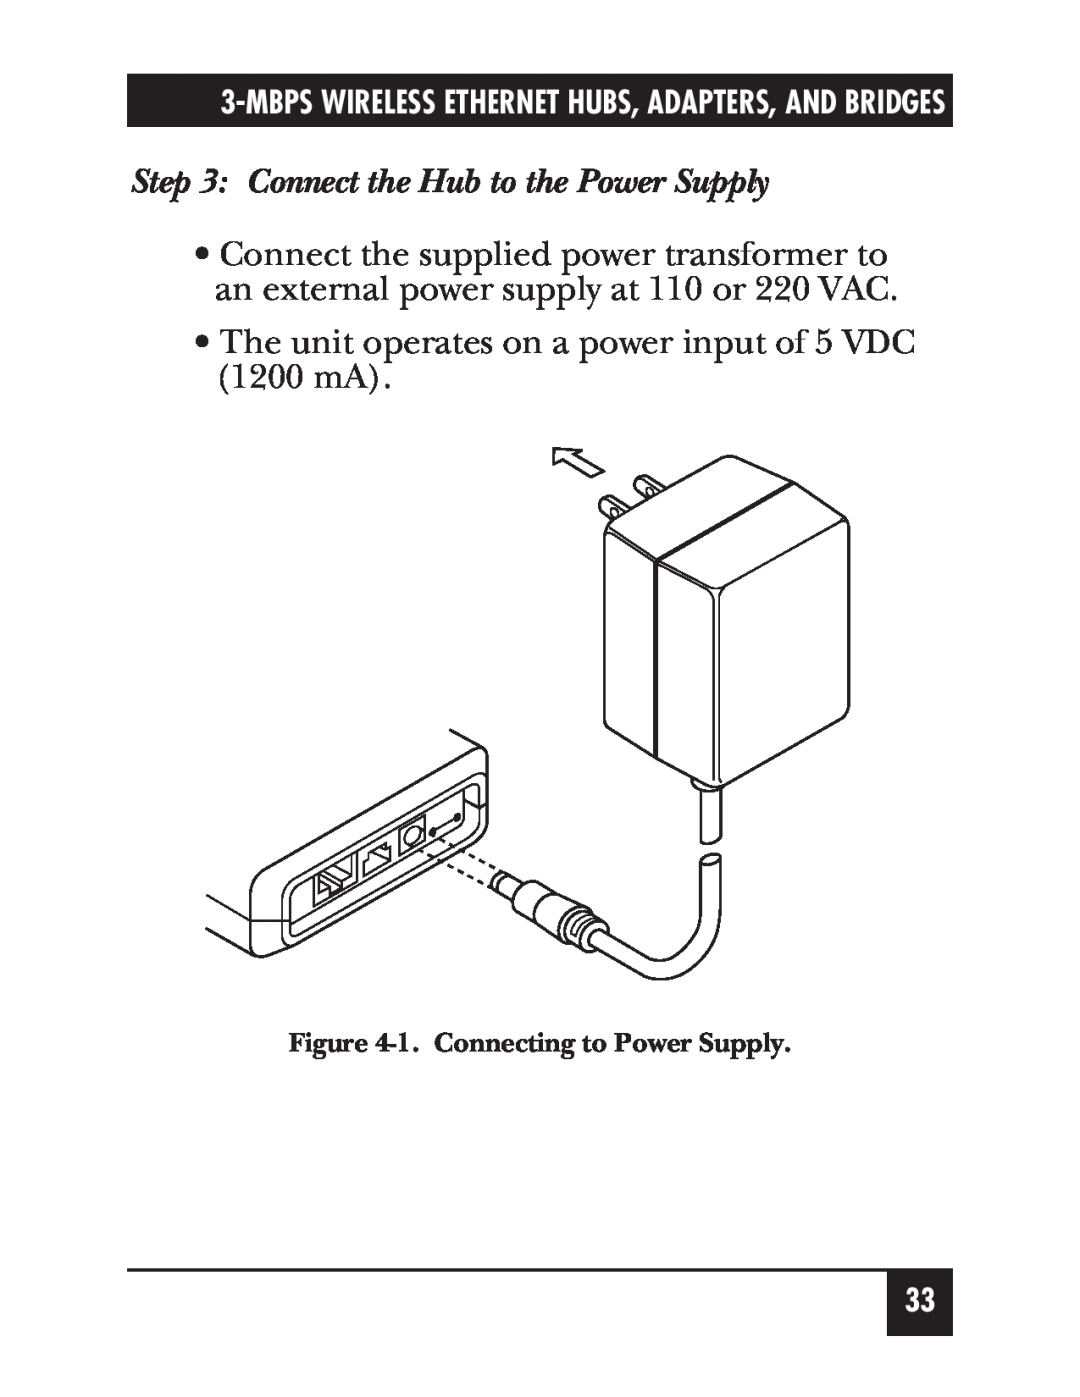 Black Box LW004A, LW012AE manual Connect the Hub to the Power Supply, The unit operates on a power input of 5 VDC 1200 mA 